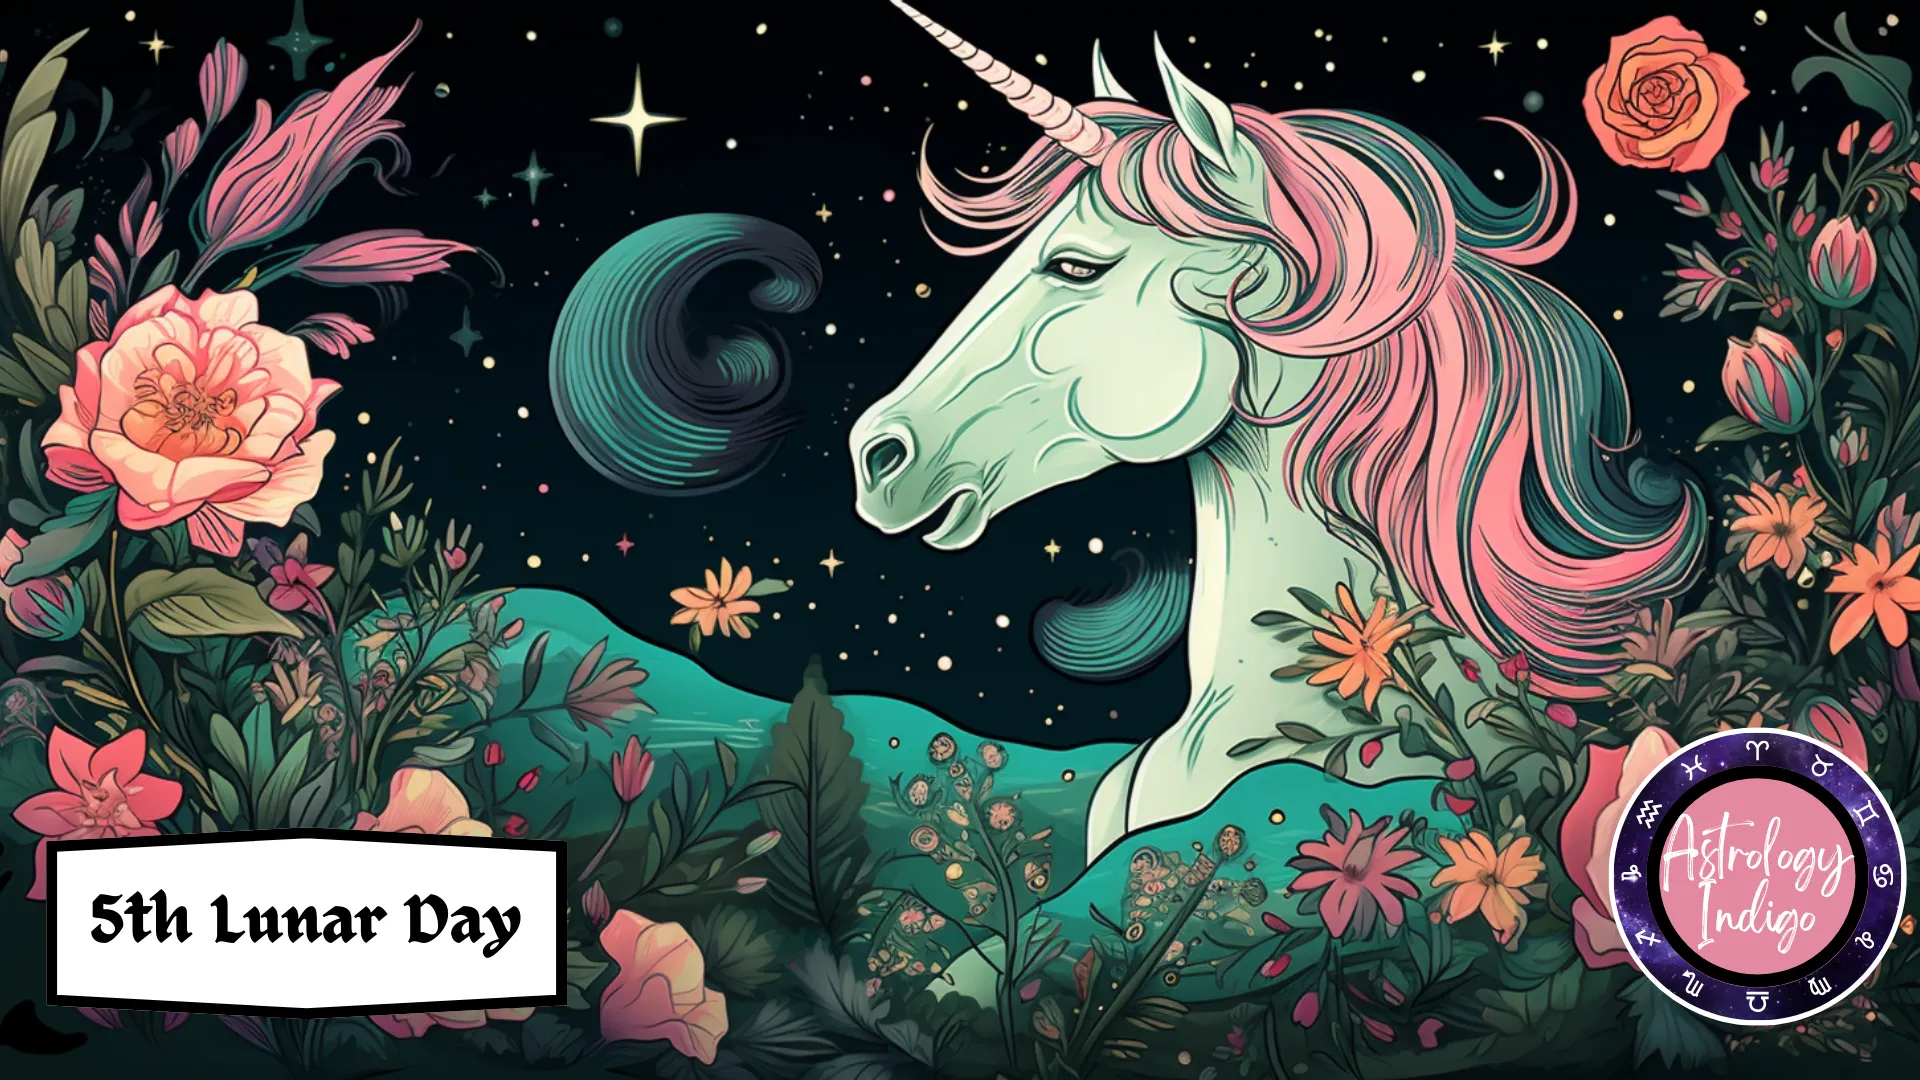 A Unicorn with a pink mane and horn is looking to the moon and stars surrounded by flowers